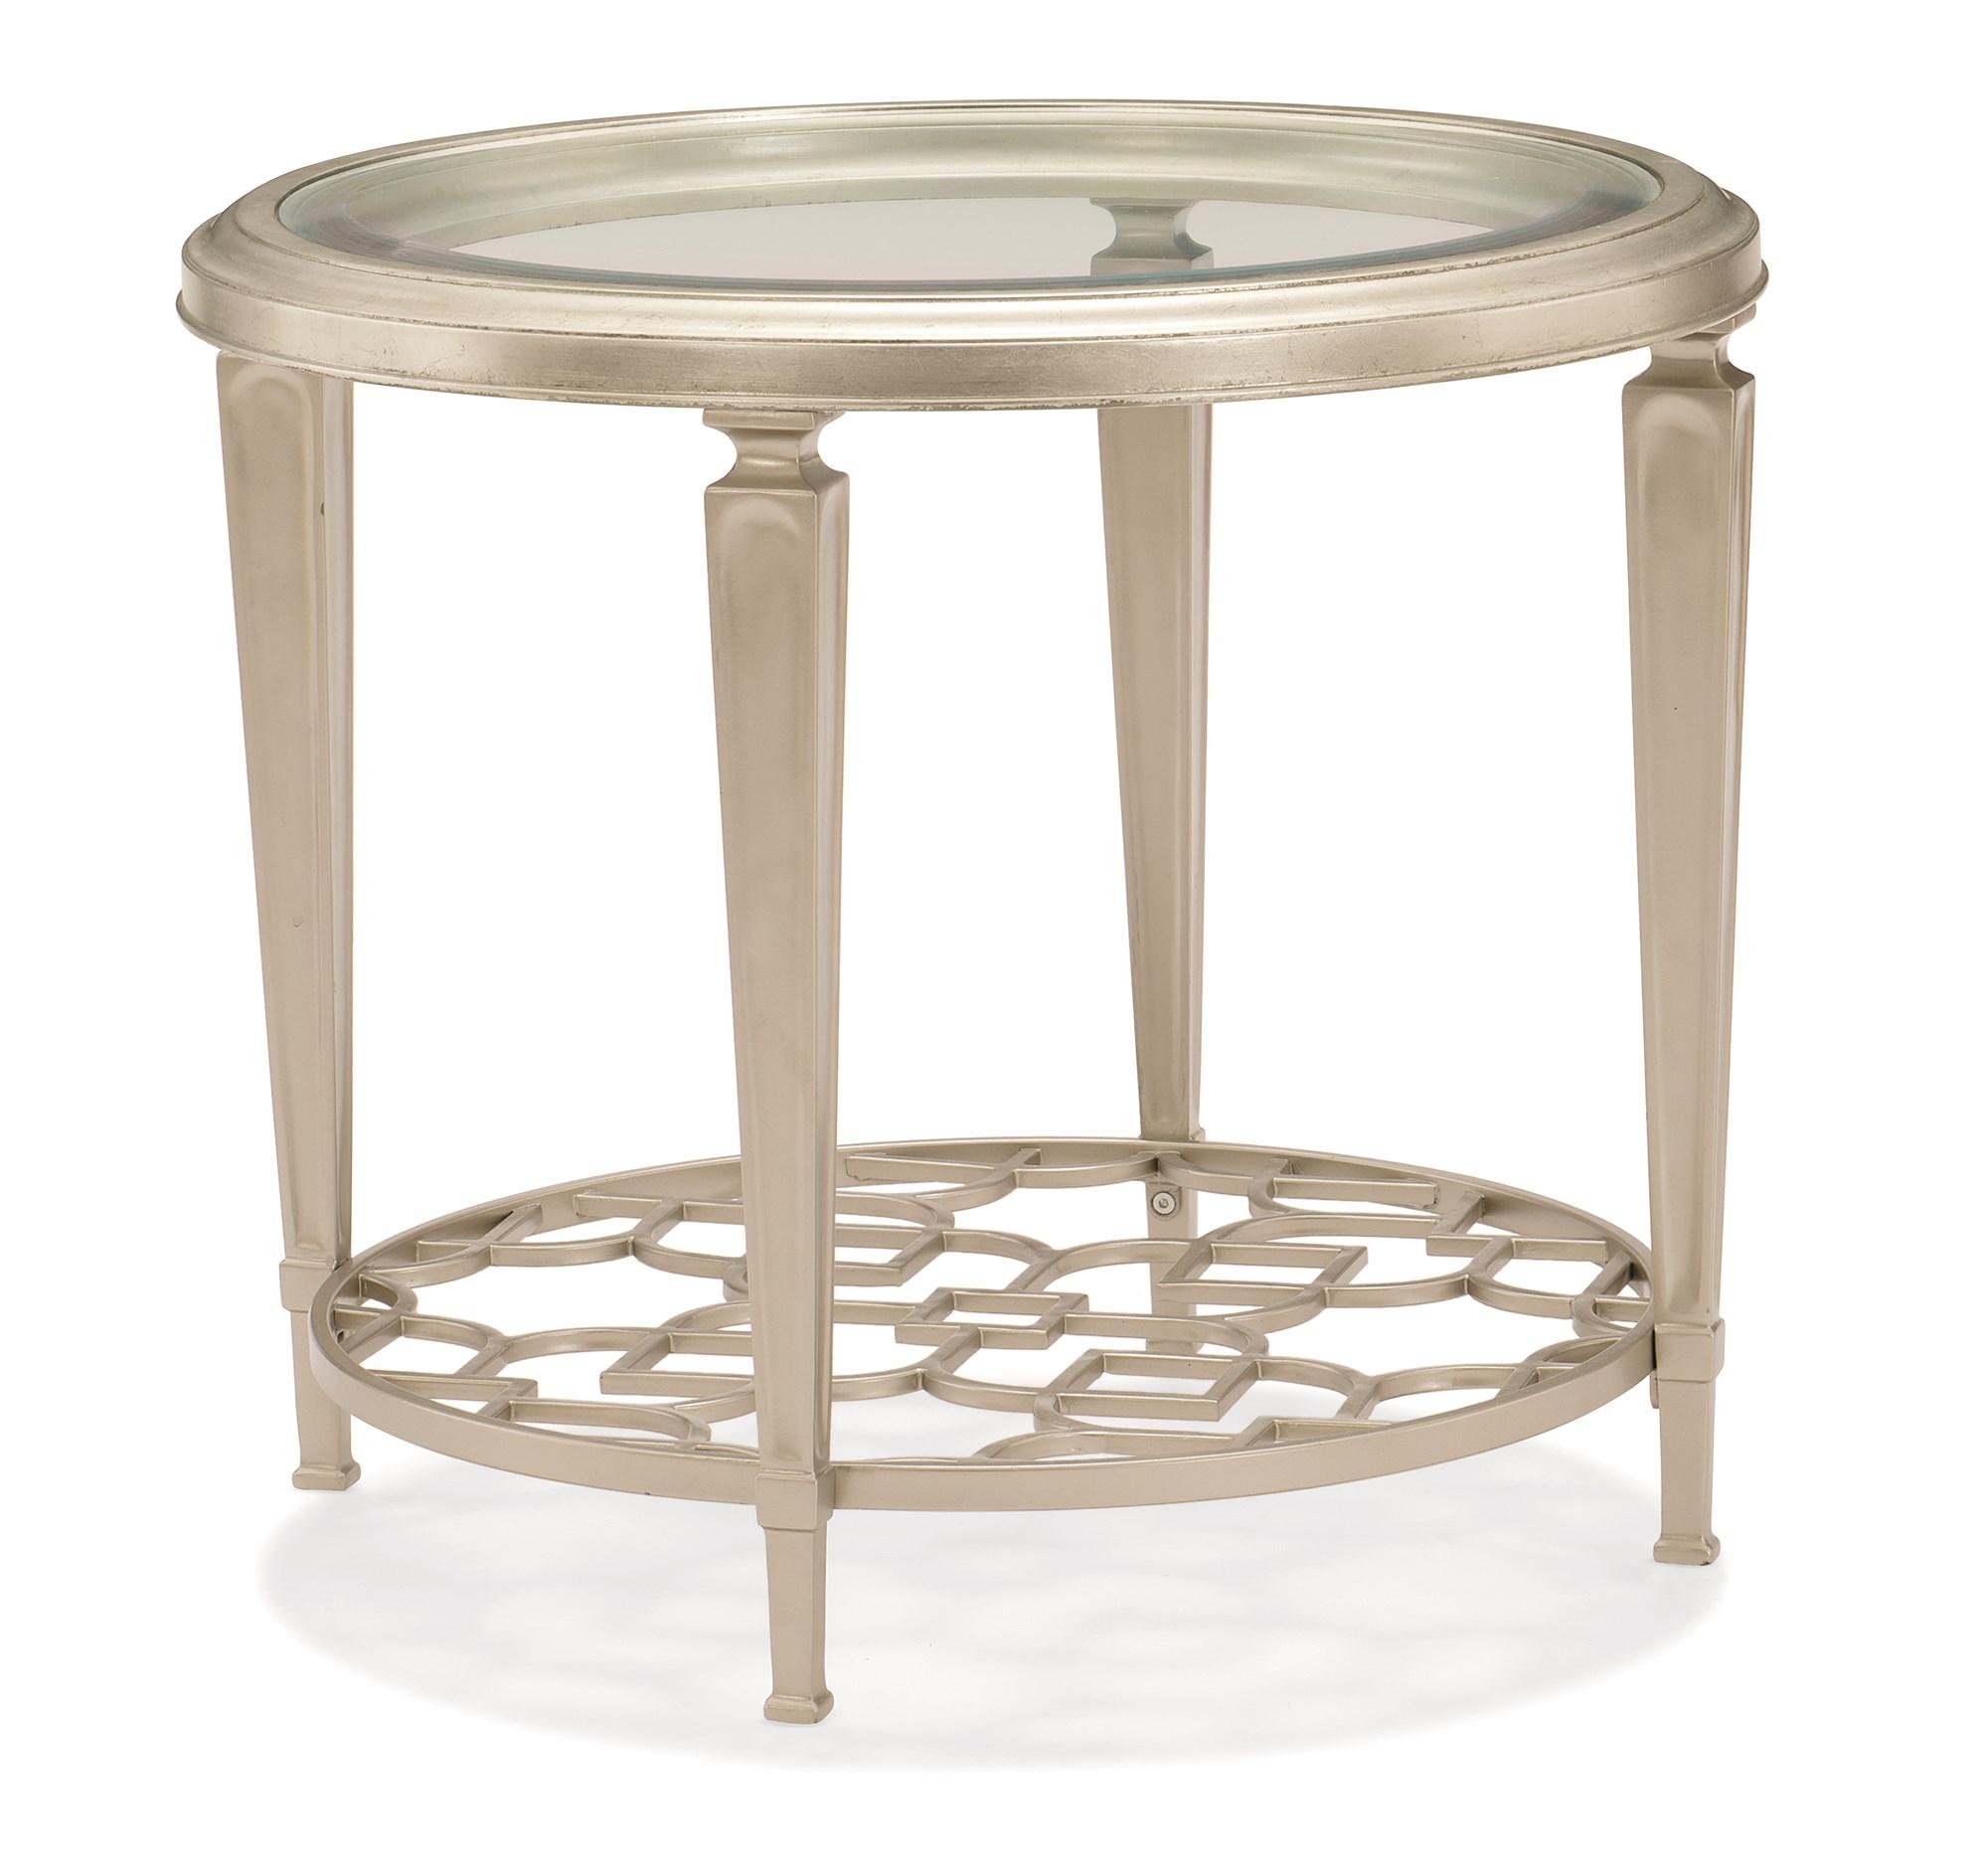 Contemporary End Table SOCIAL CIRCLE CLA-418-413 in Taupe, Silver 